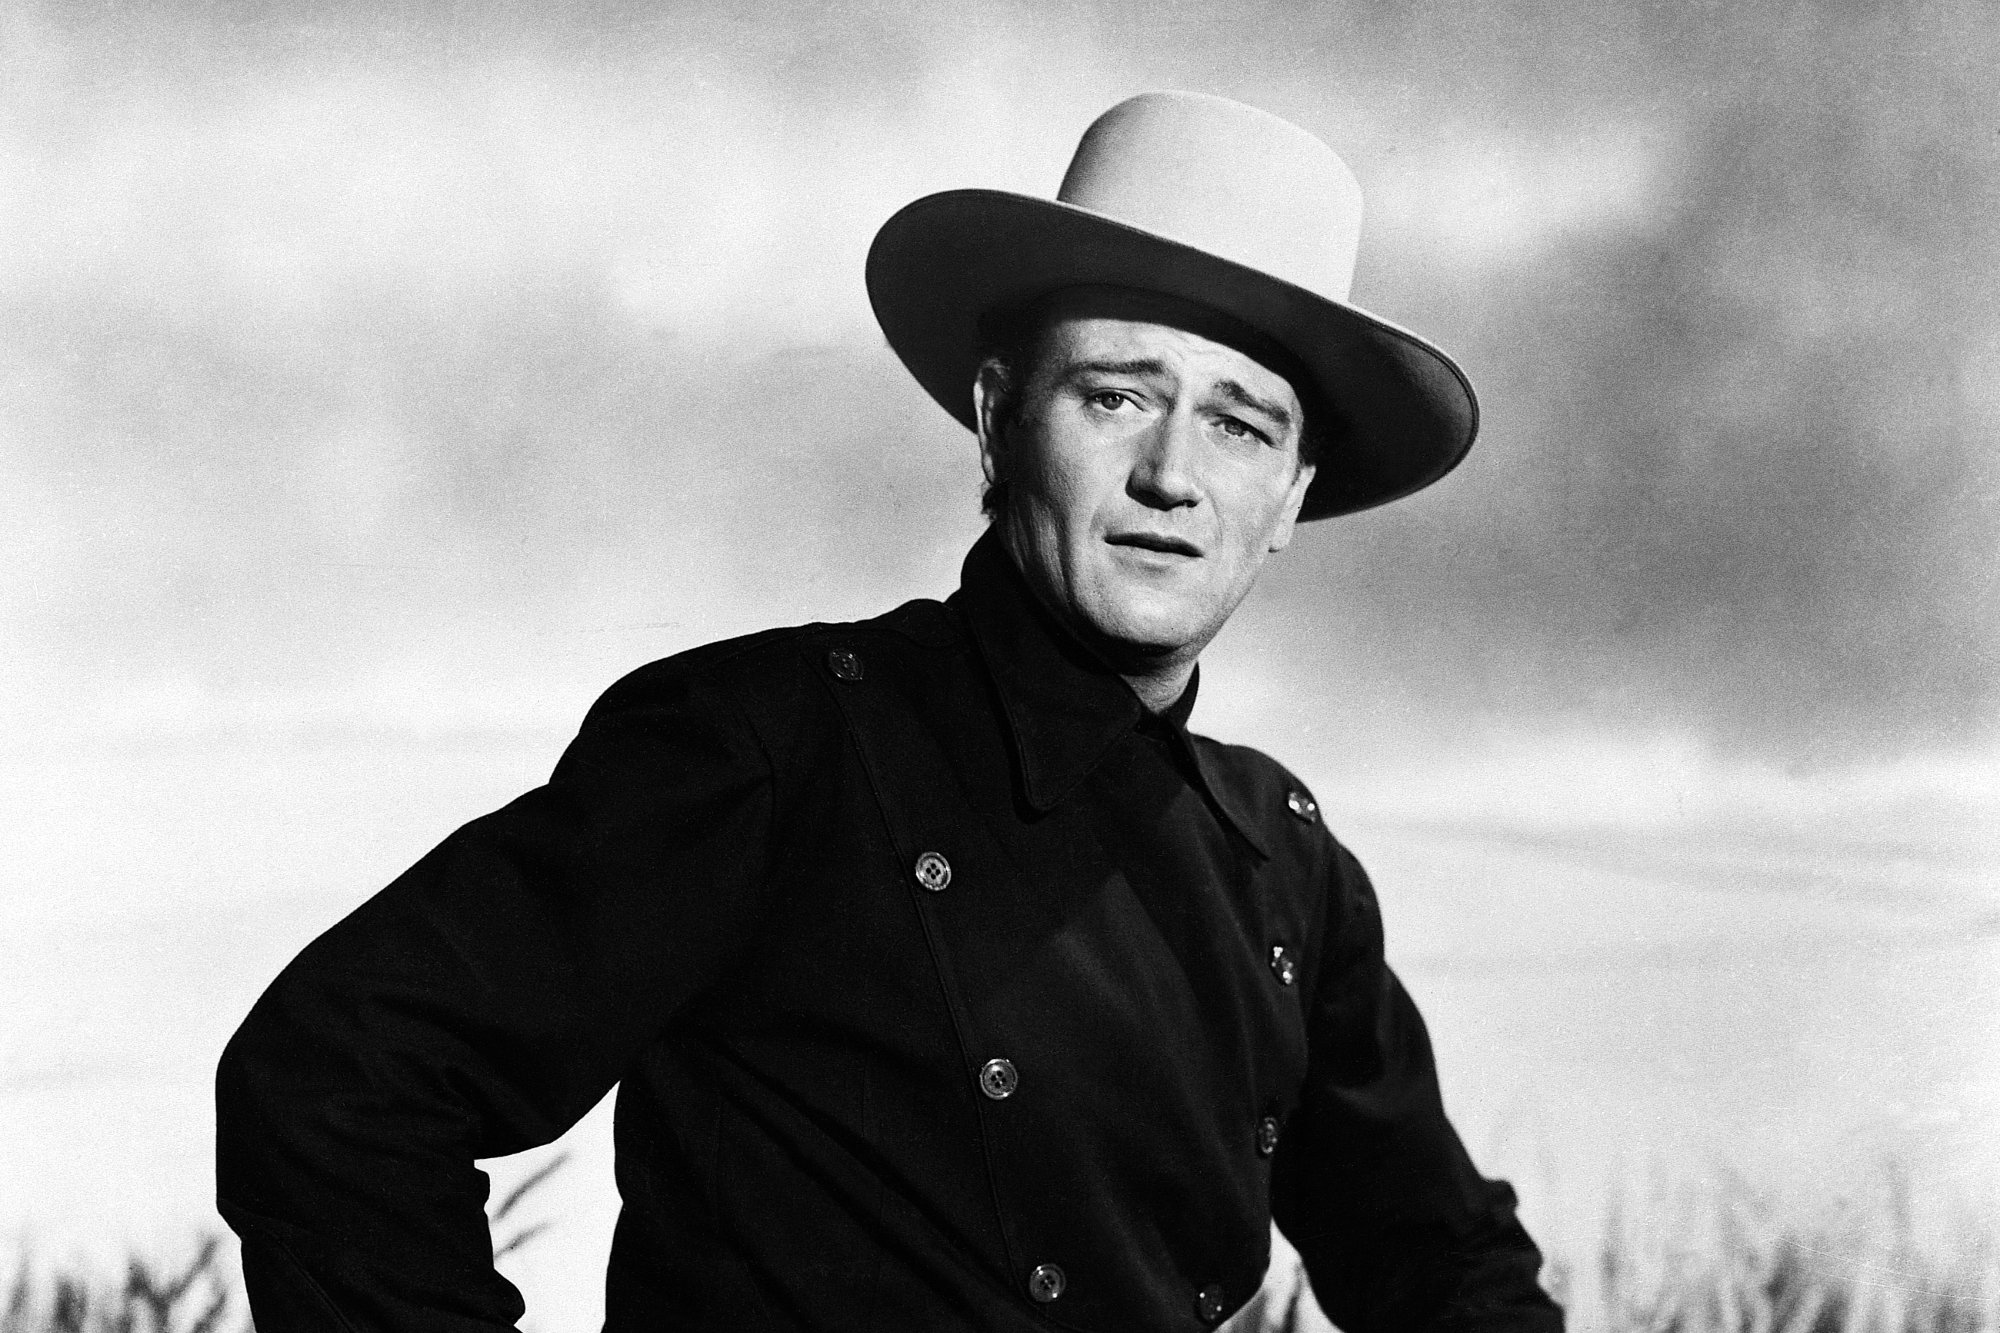 John Wayne, star of Western movies. He's wearing Western costume attire in a black-and-white photo.